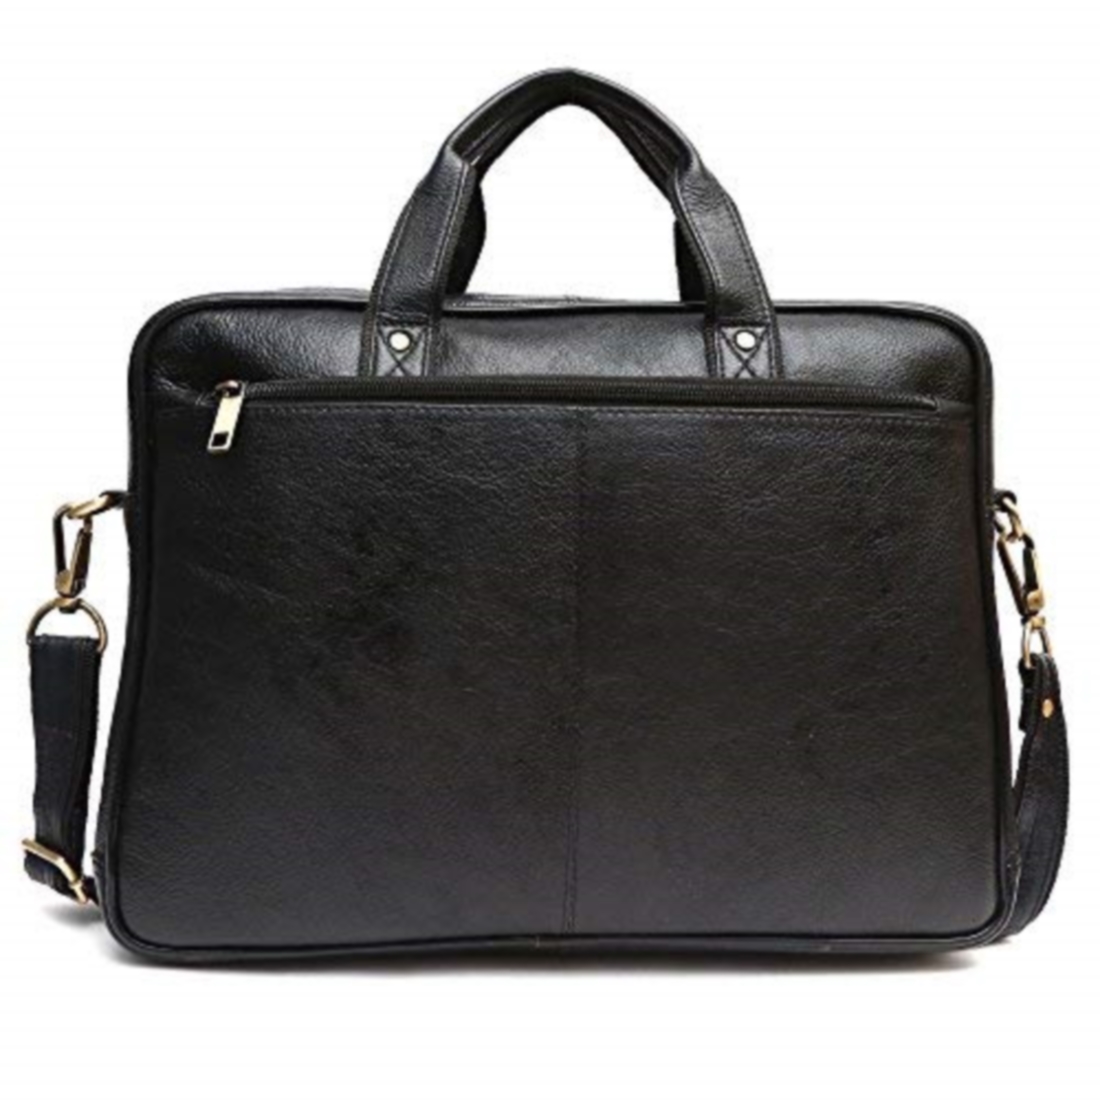 Pure Leather Laptop Bag Bulk Deal at B2B Marketplace for Leather Goods